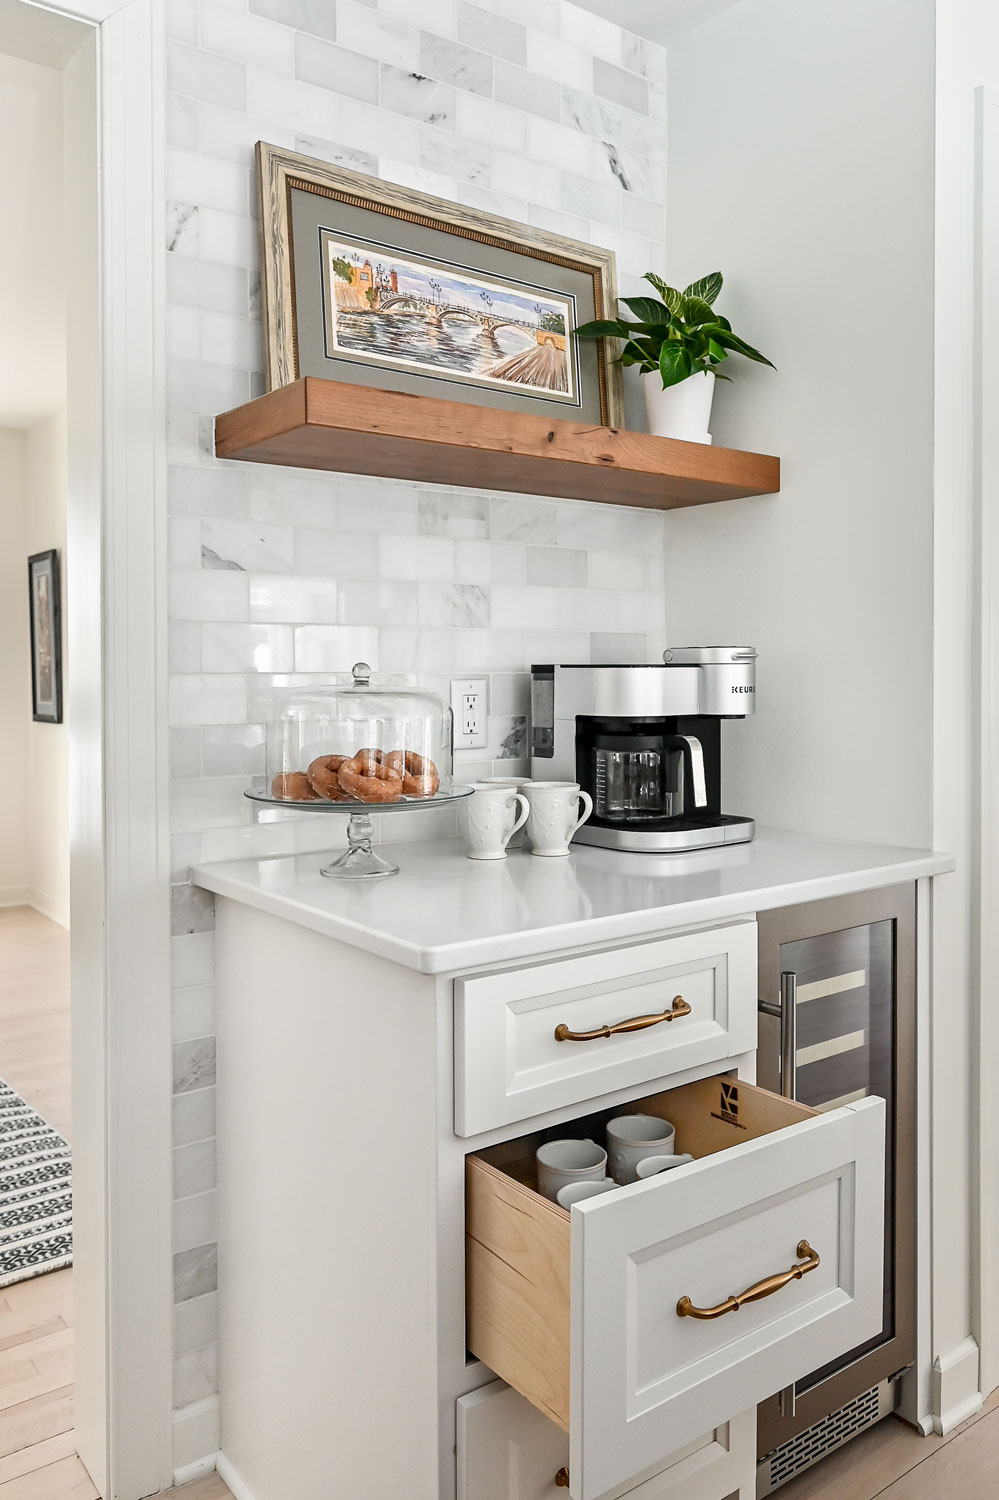 small counter space in a kitchen used for a coffee machine. Drawer below holds coffee mugs